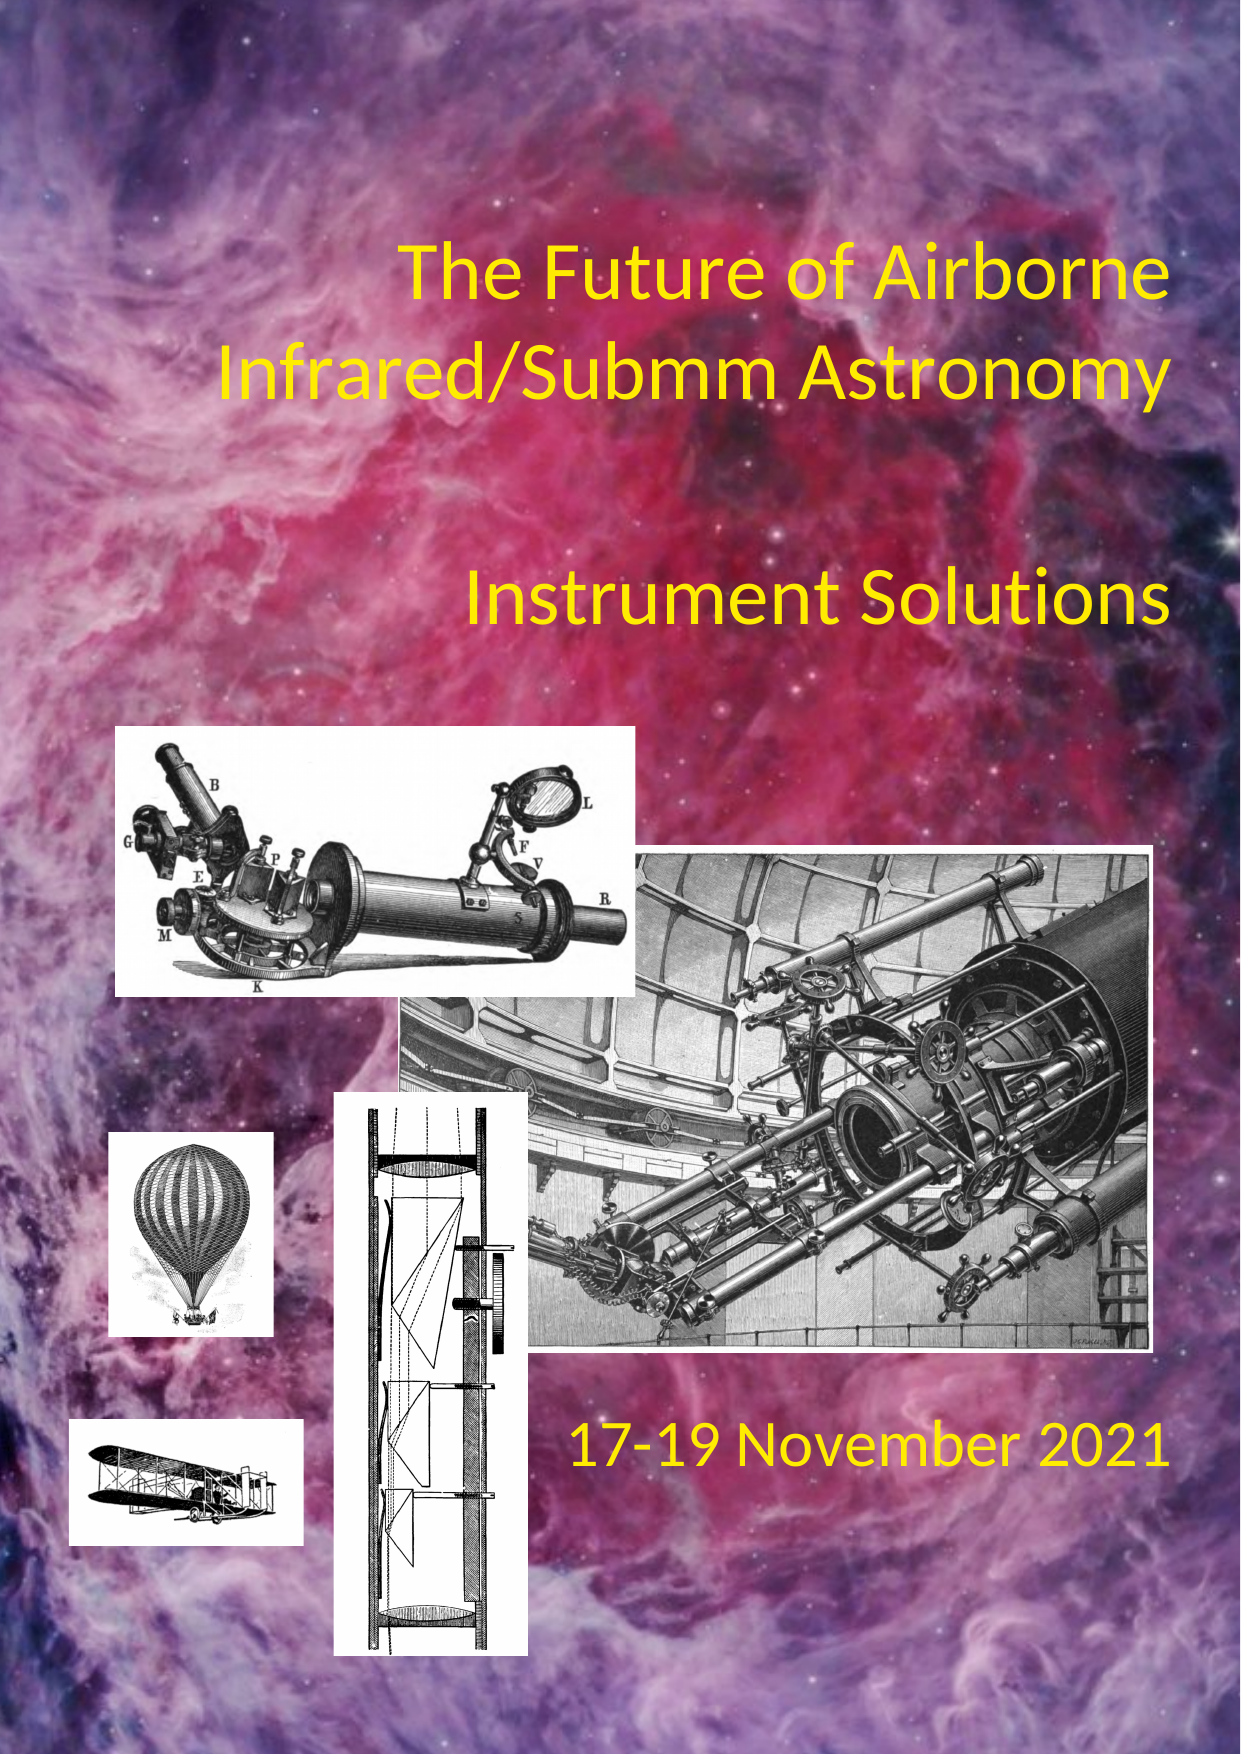 The Future of Airborne Infrared/Submm Astronomy